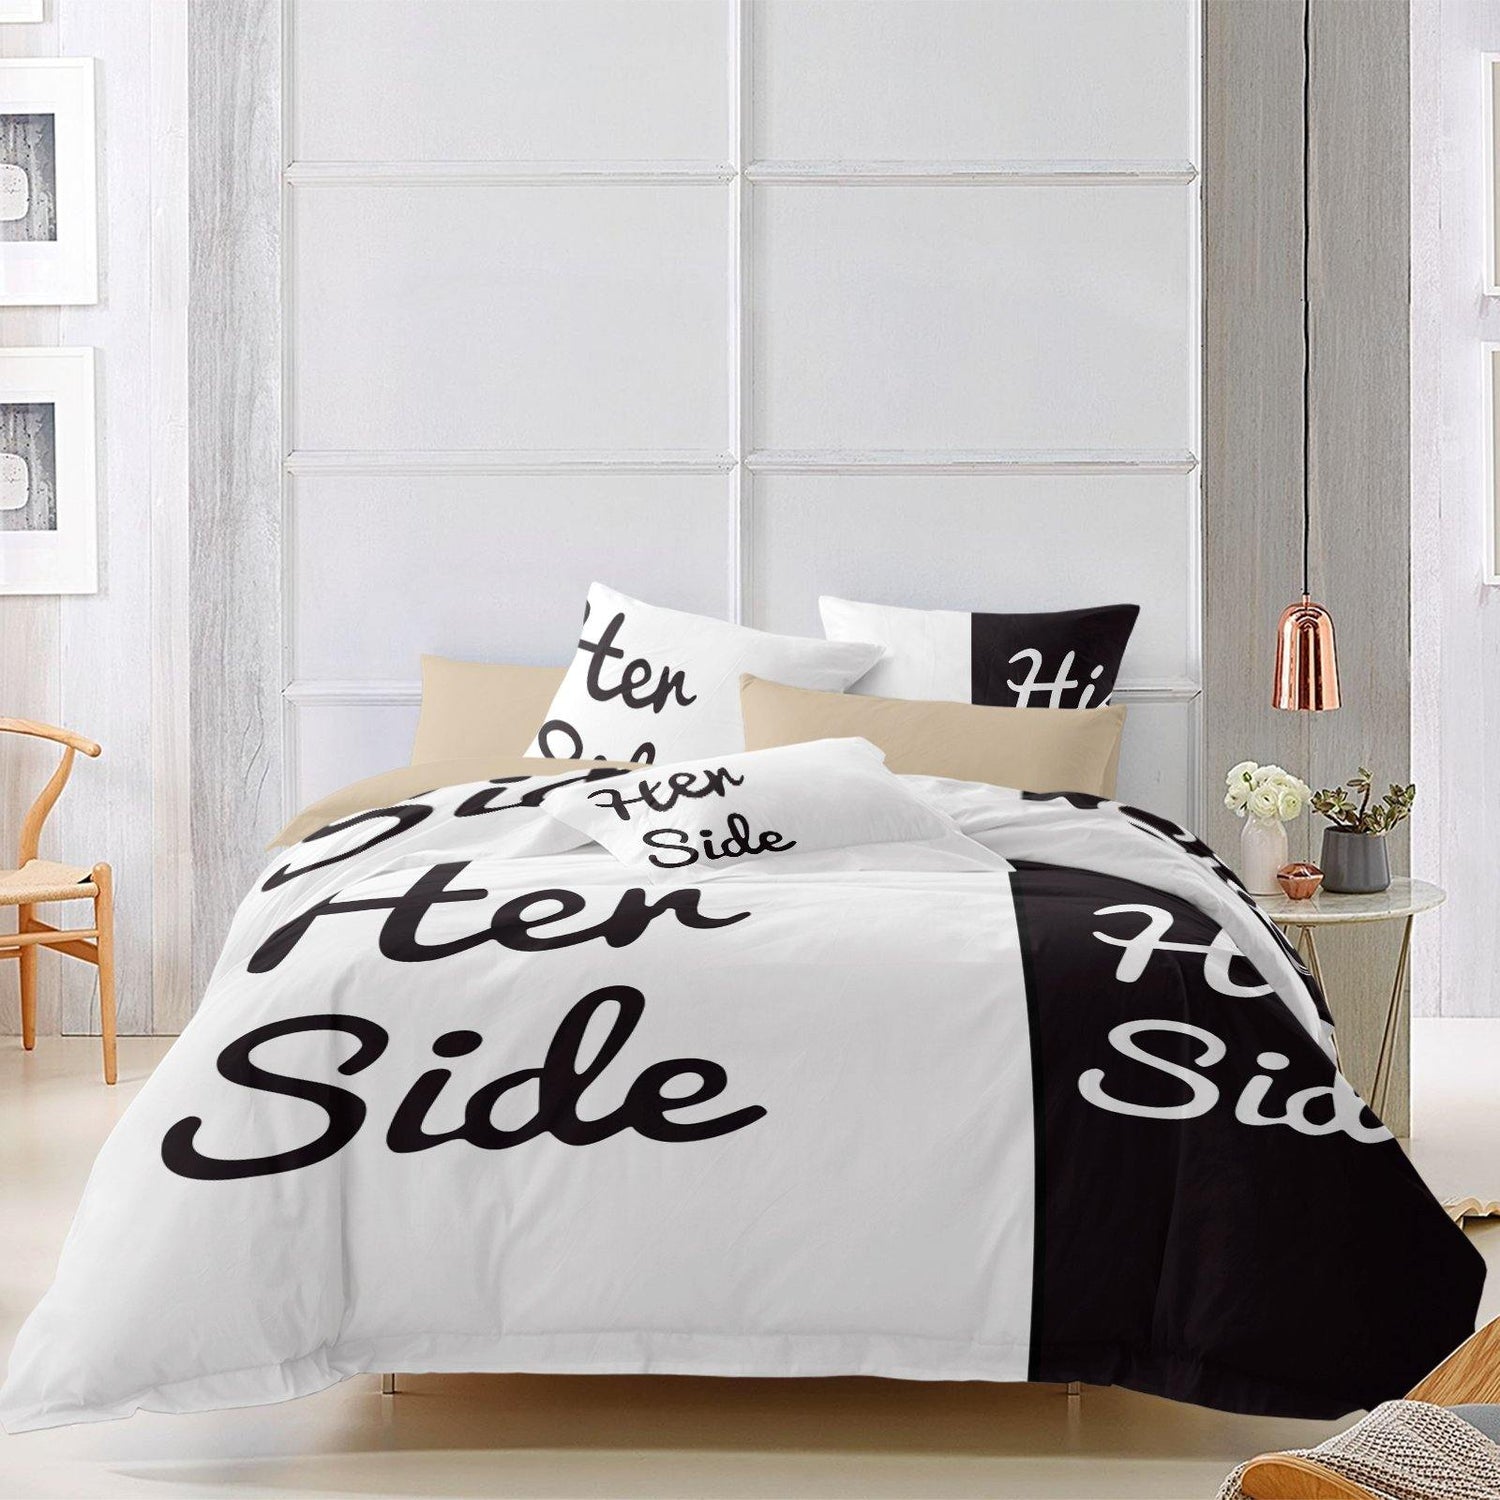 WONGS BEDDING black and white with simple and stylish bedding bedroom home kit - Wongs bedding